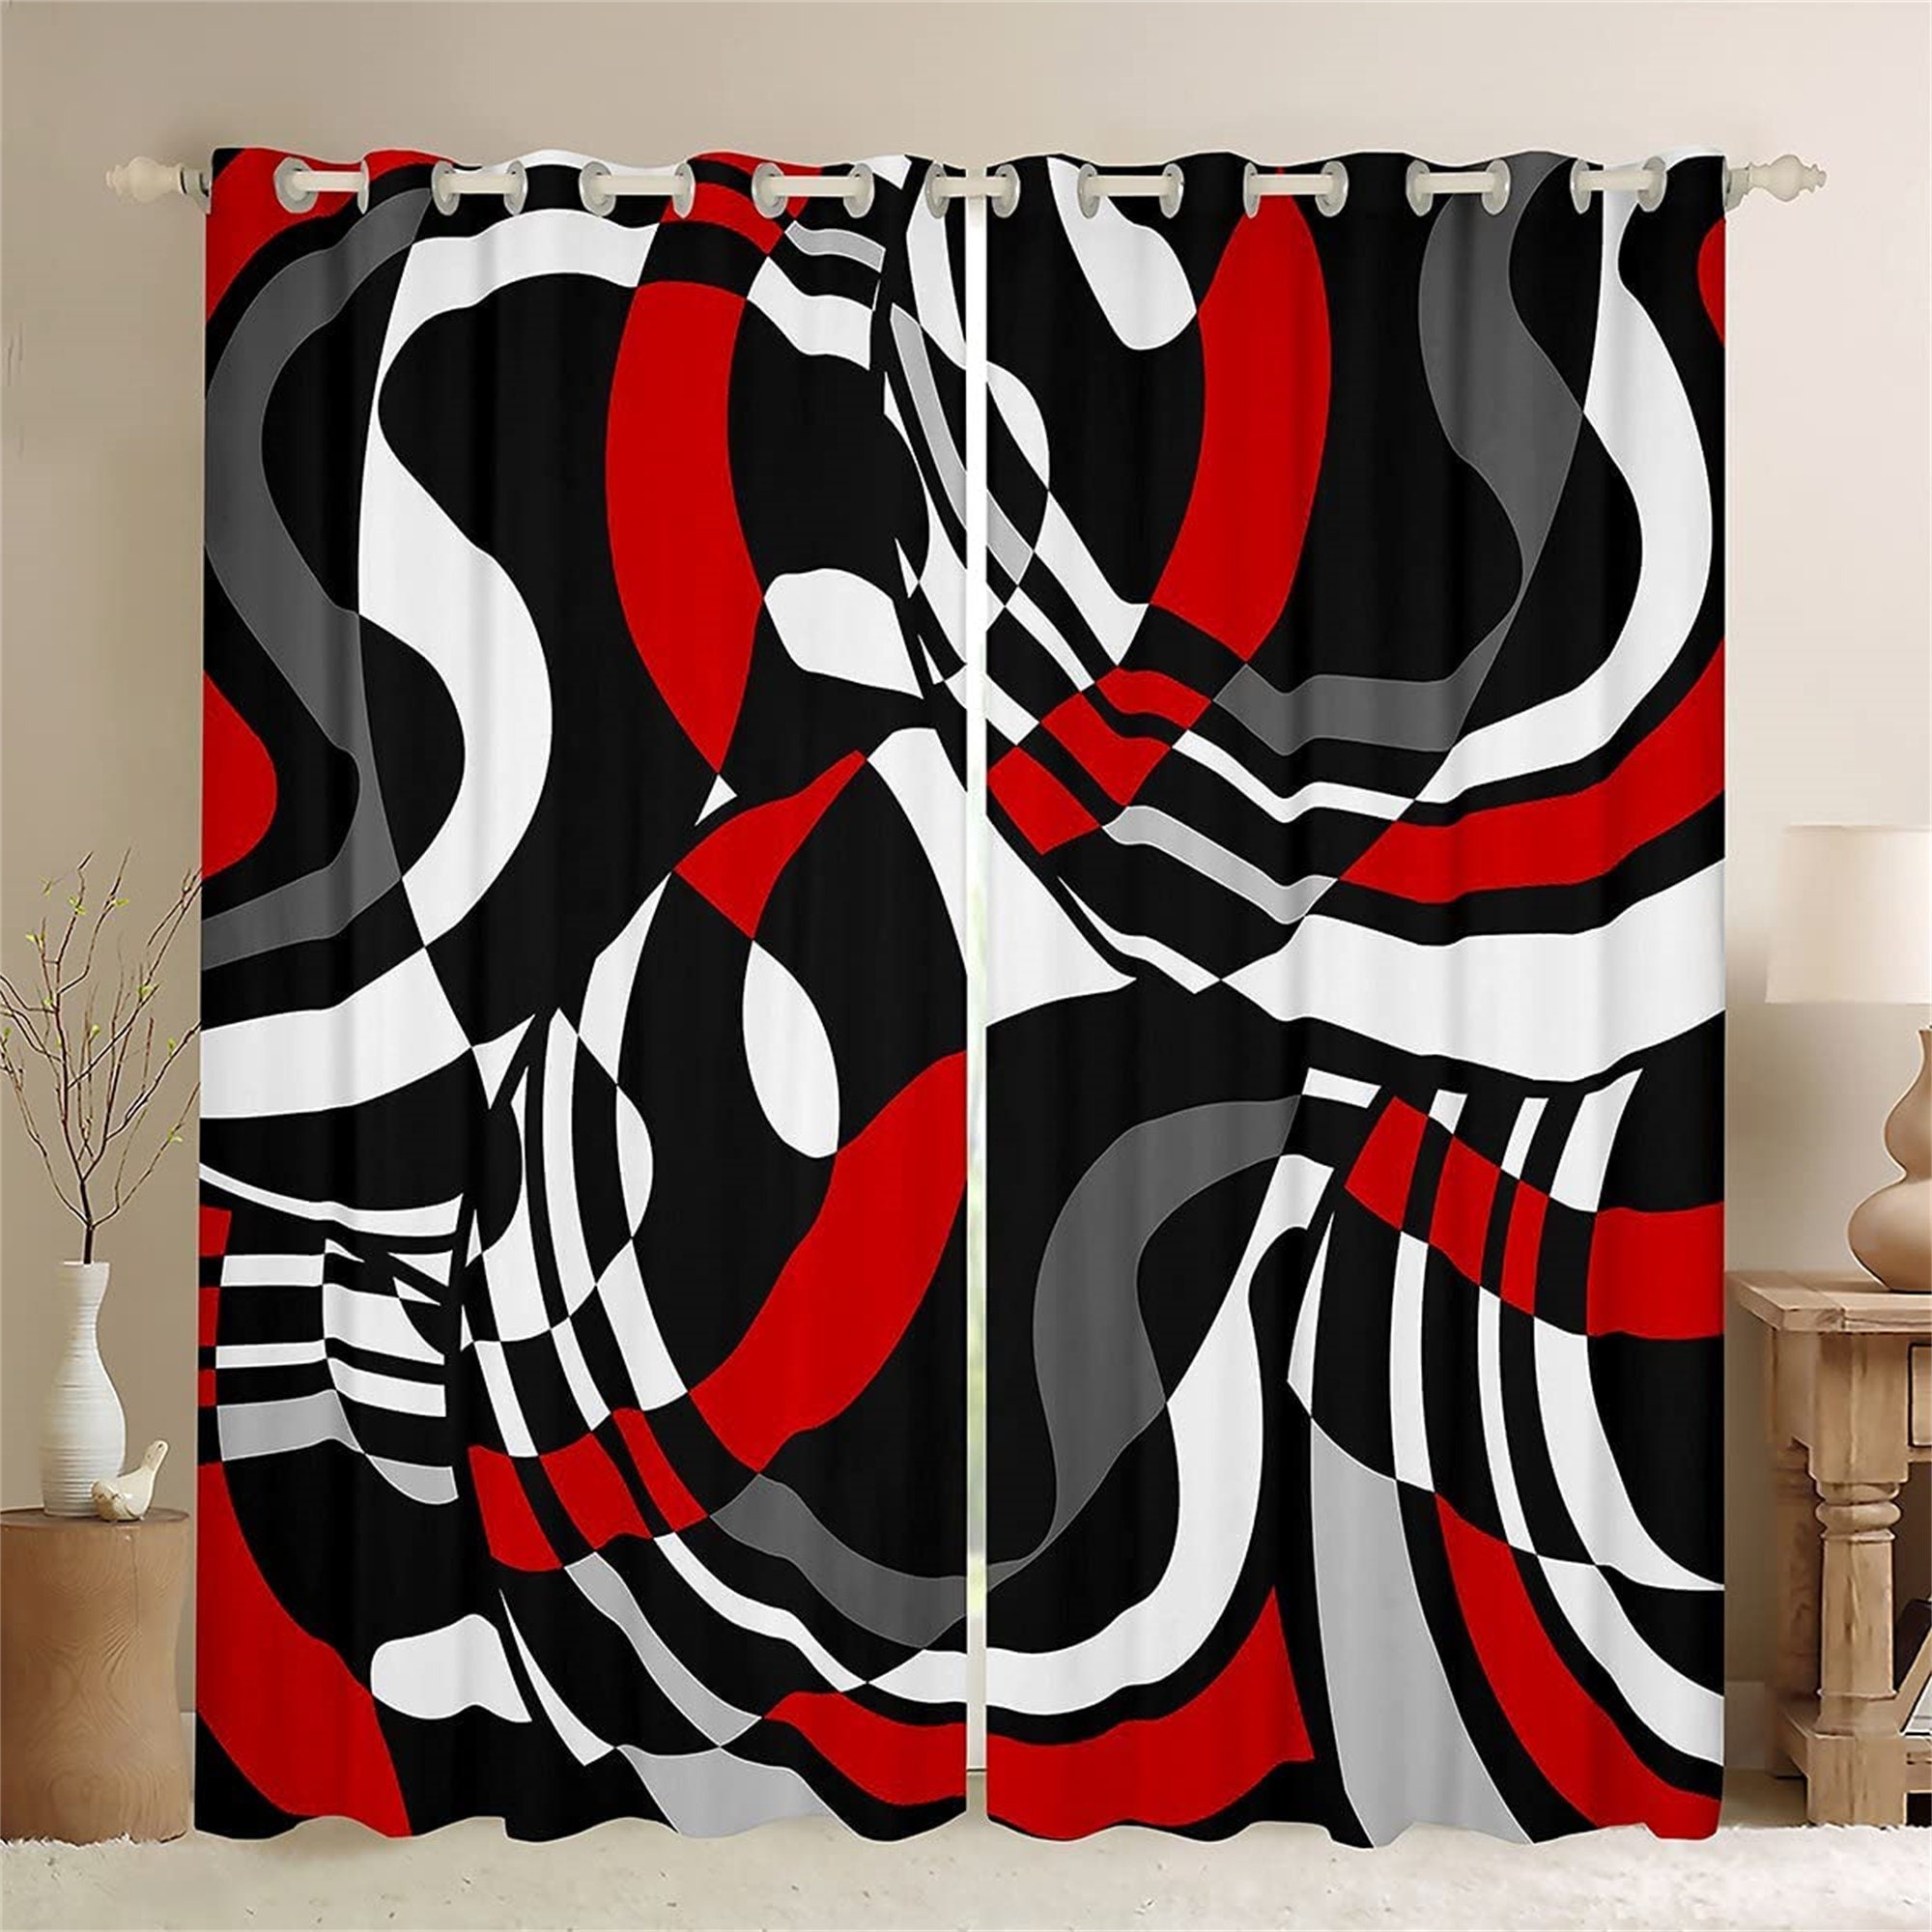  MESHELLY Red Black Grey Geometric Kitchen Curtains